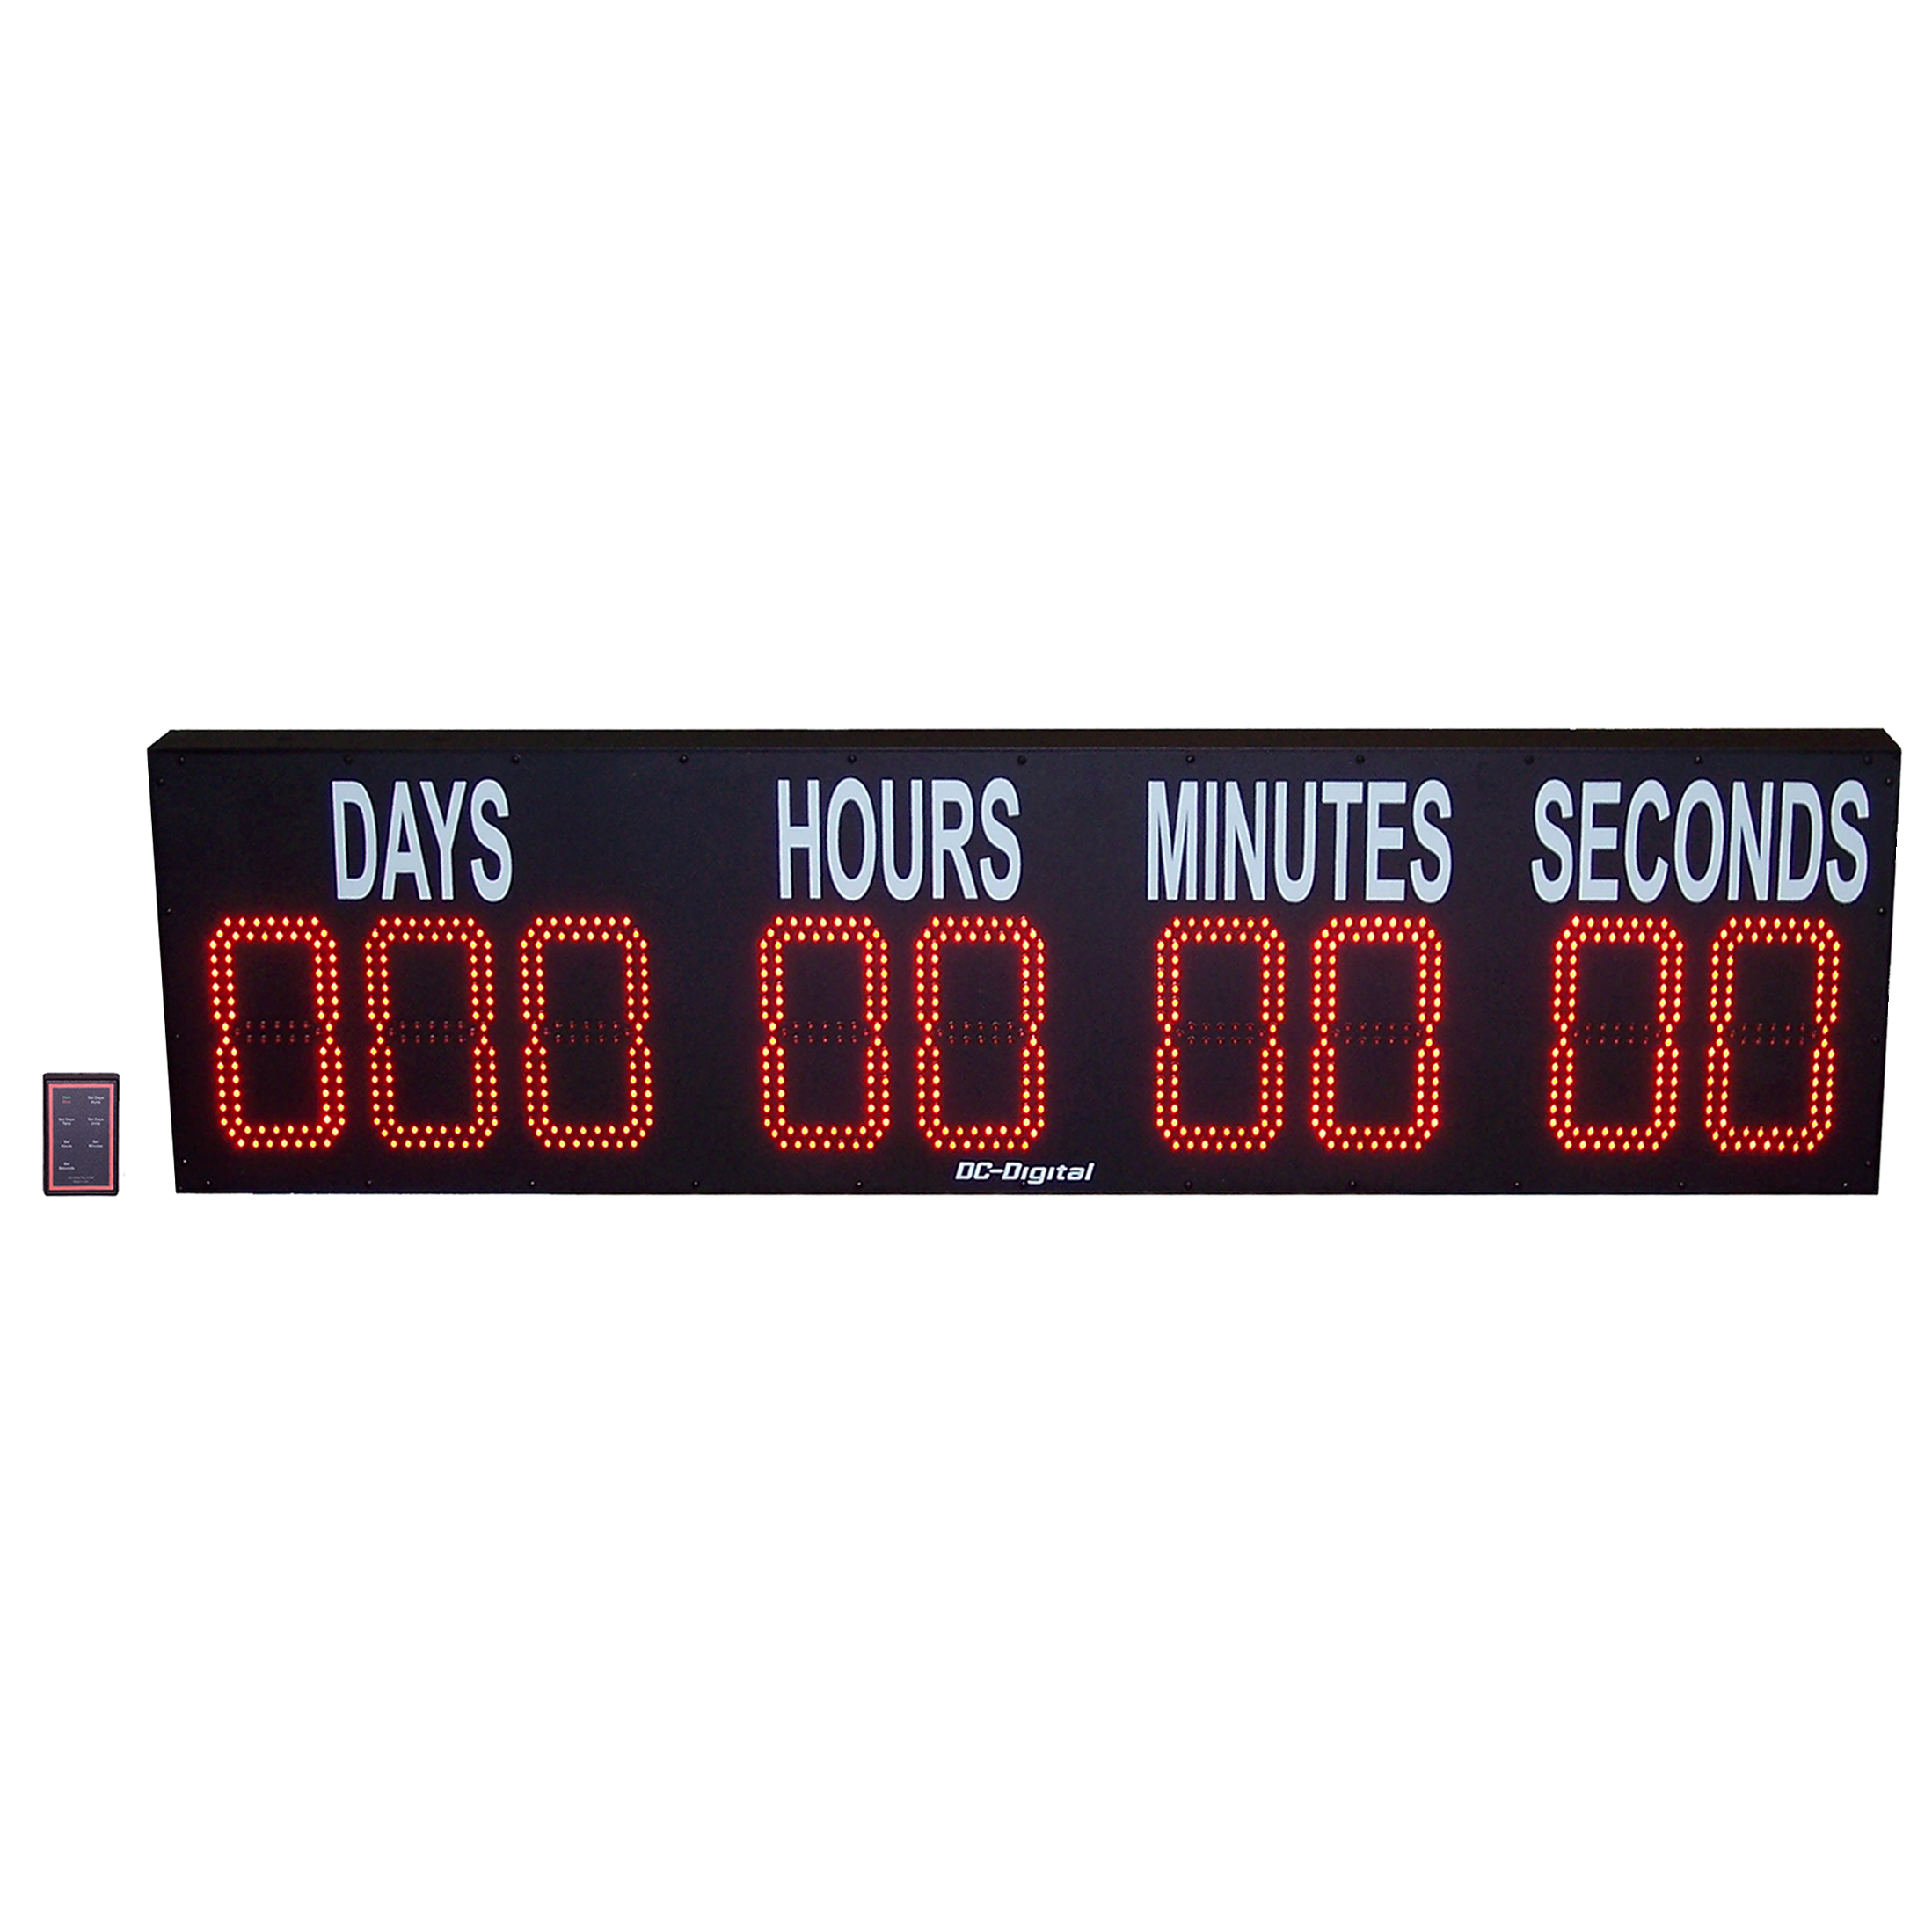 (DC-809T-DN-W) 8.0 Inch LED Digital, RF-Wireless Handheld Controlled, Countdown to a Special Event Timer, Days, Hours, Minutes, Seconds (OUTDOOR)